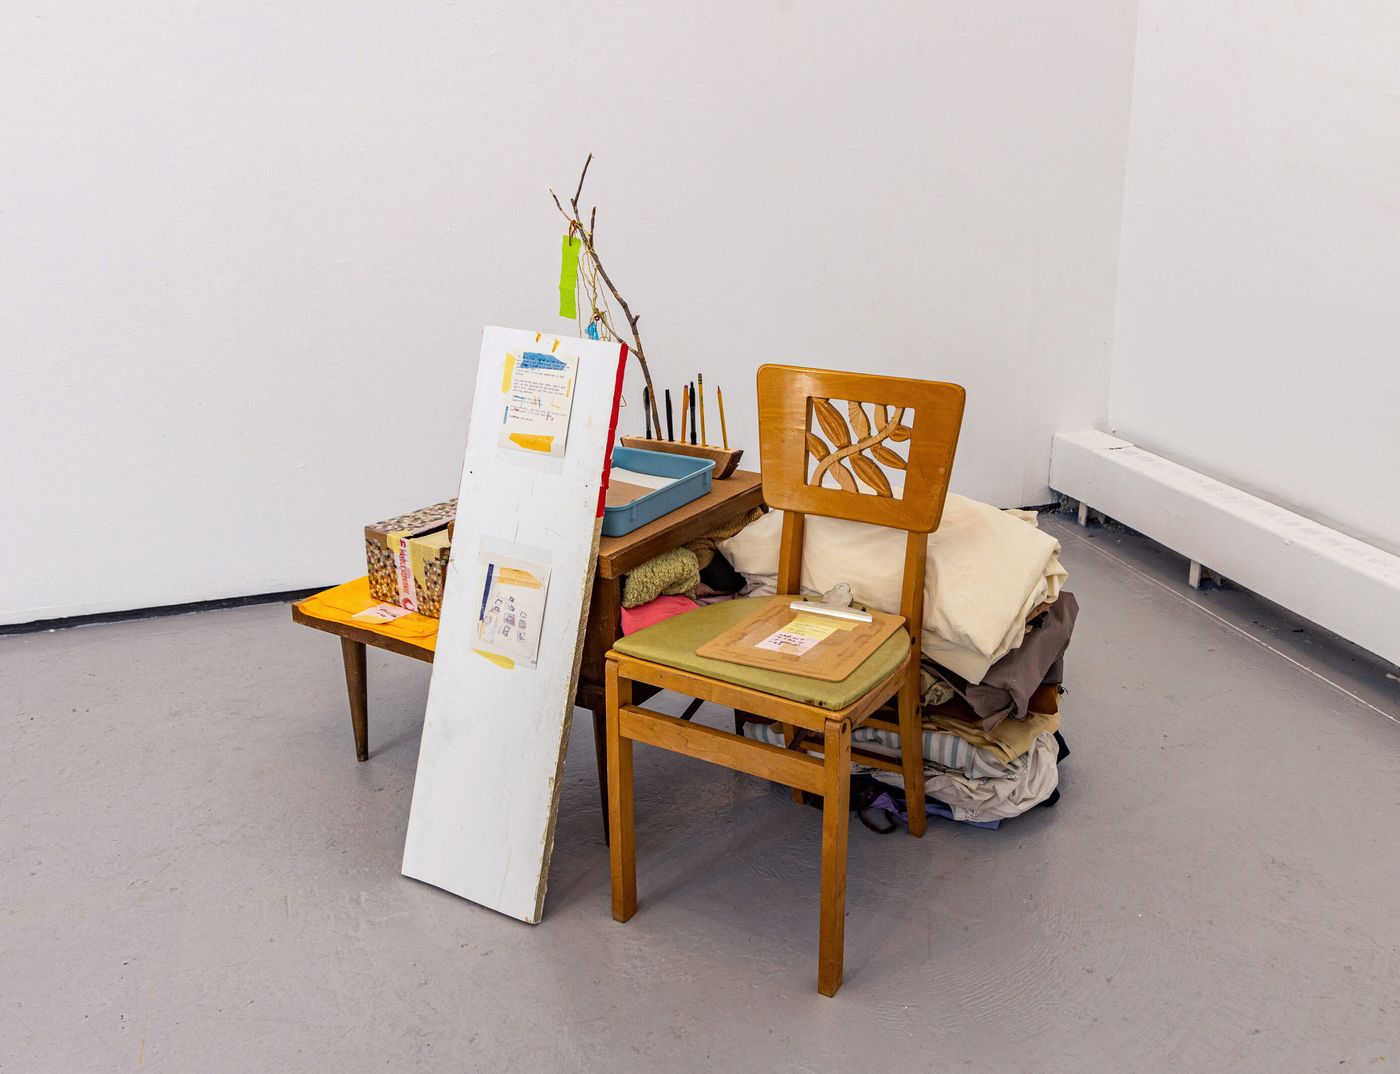 Letter Writing Station, 2022. My summer clothes, found and borrowed furniture and objects, wood, riso print, tree branch, cardboard, string, and fabric; 55 x 45 x 27 in. Photo: Meghan Olson.